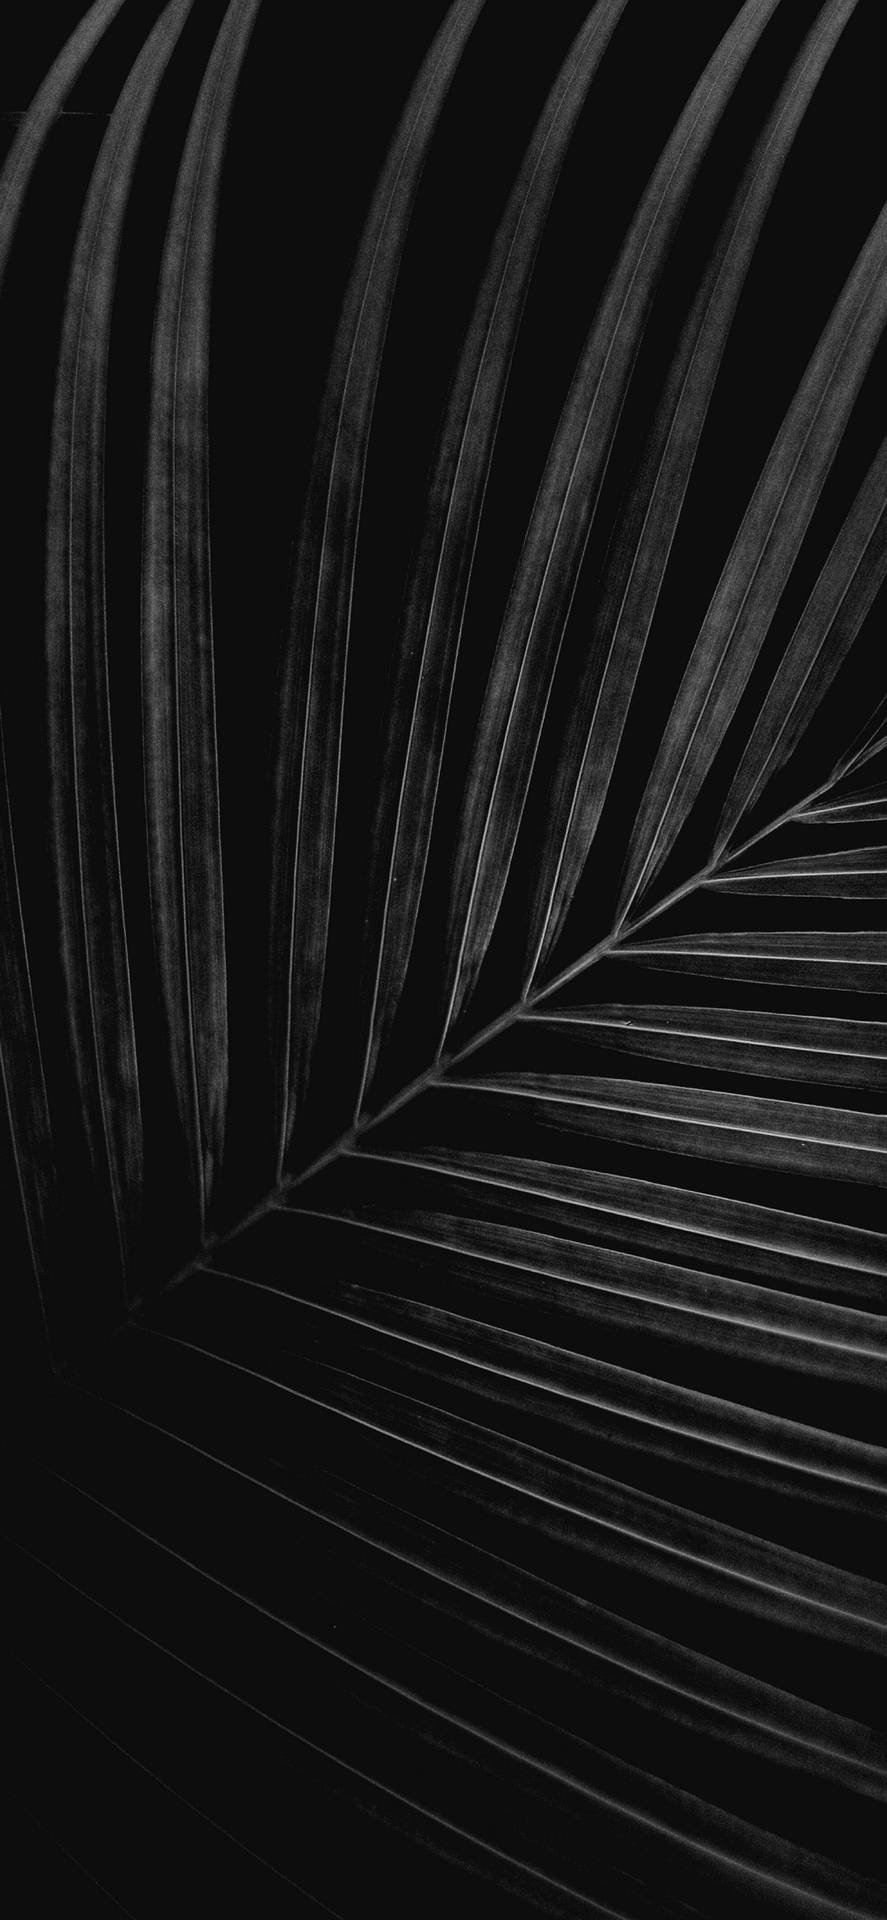 iPhone X Original Black And White Leaves Wallpaper